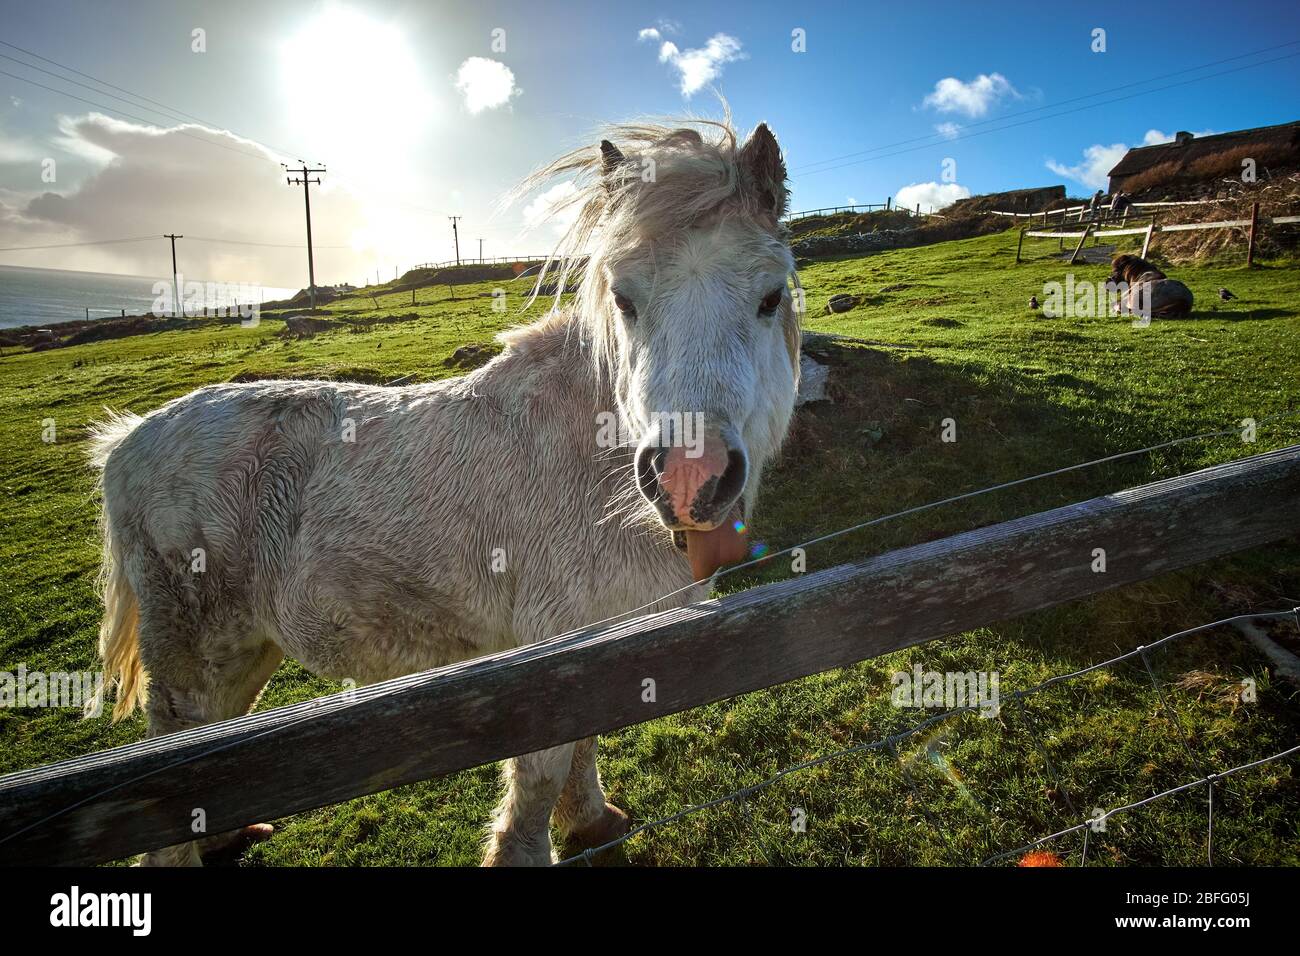 White horse looking at camera in outdoor photograph at an Irish oceanview farm on a hill in the Dingle Peninsula of Ireland. Stock Photo